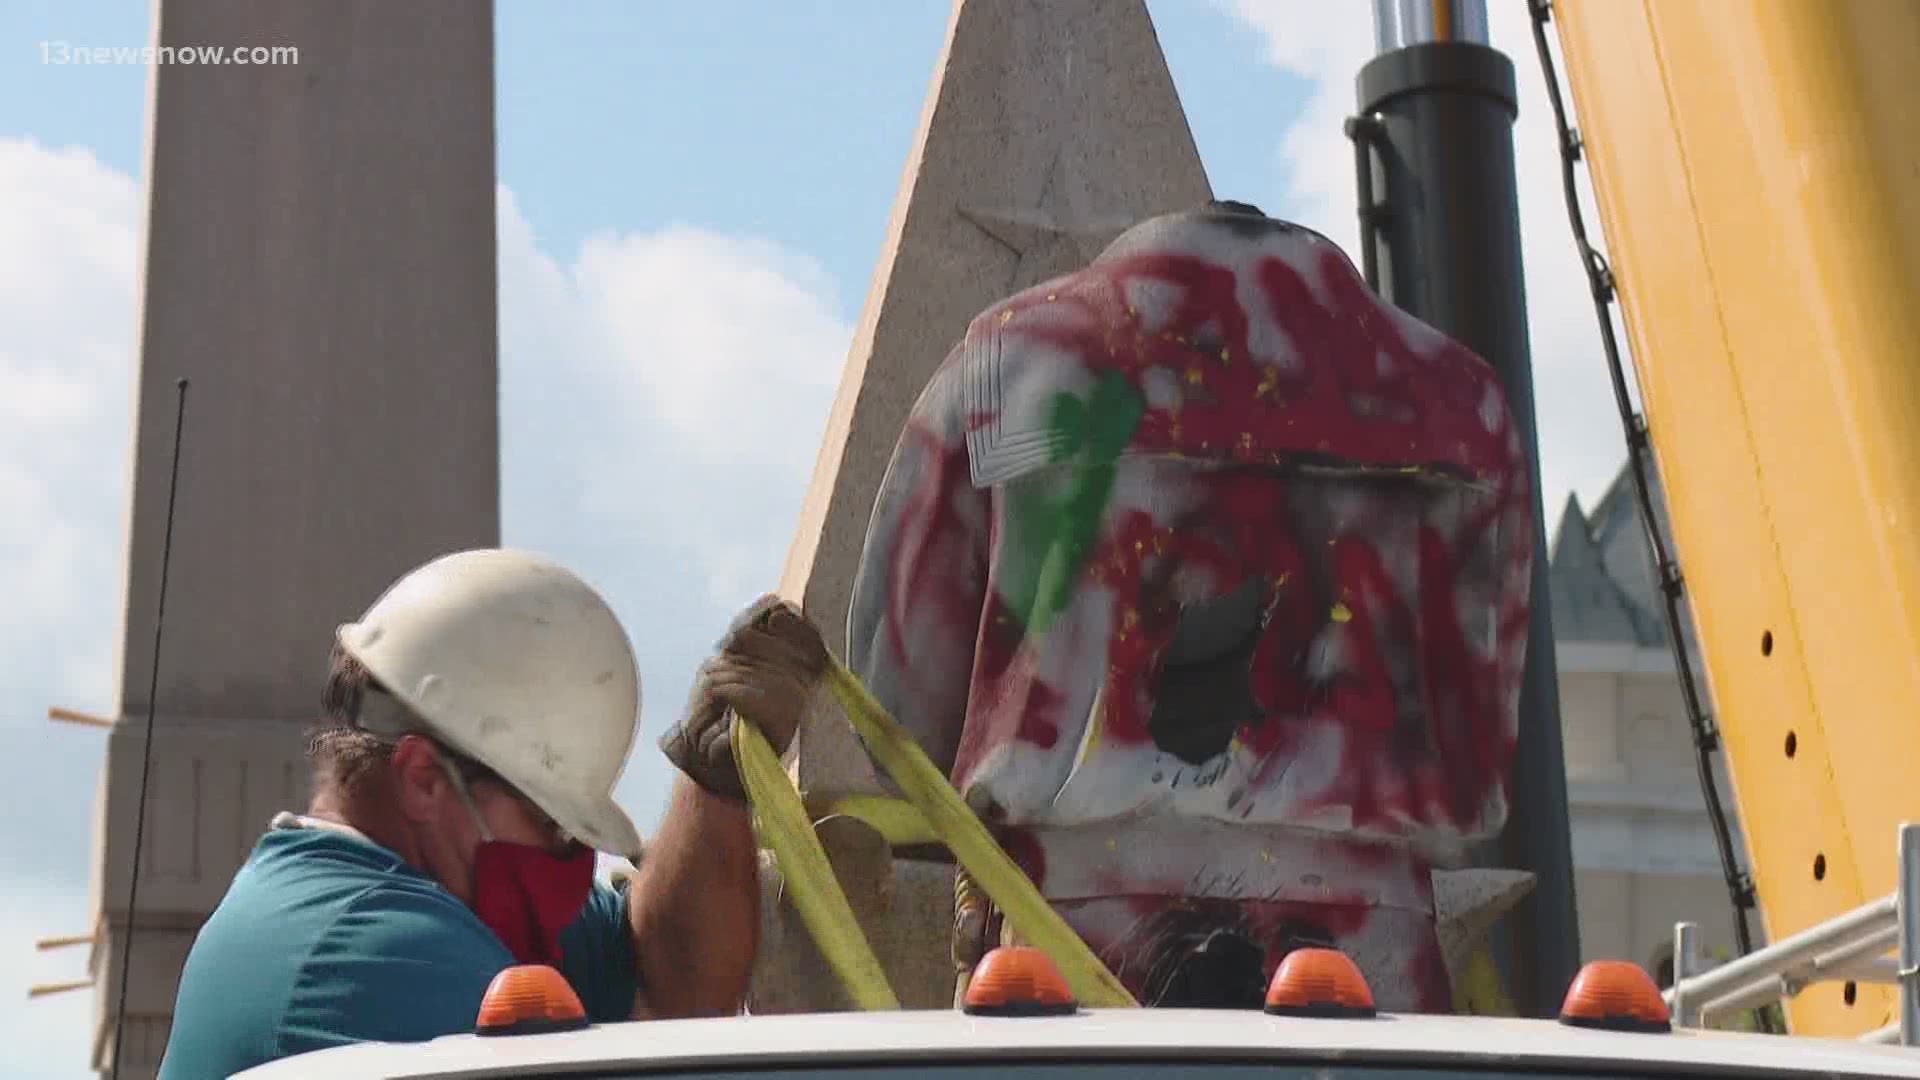 Crews started dismantling the Portsmouth Confederate monument Wednesday morning as the city prepares for its relocation.